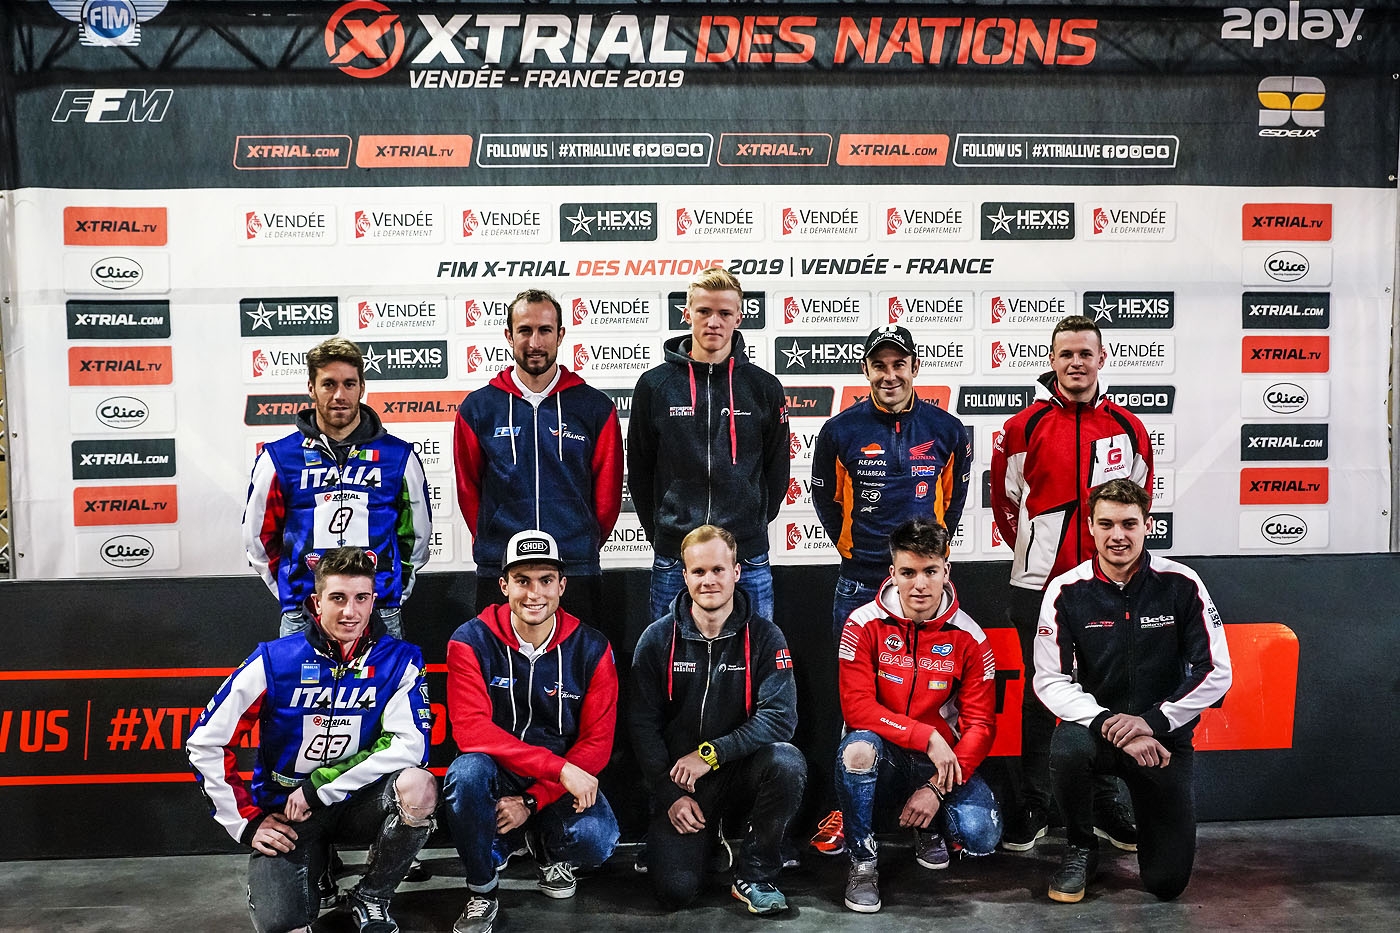 New date for the 2020 FIM X-Trial of Nations